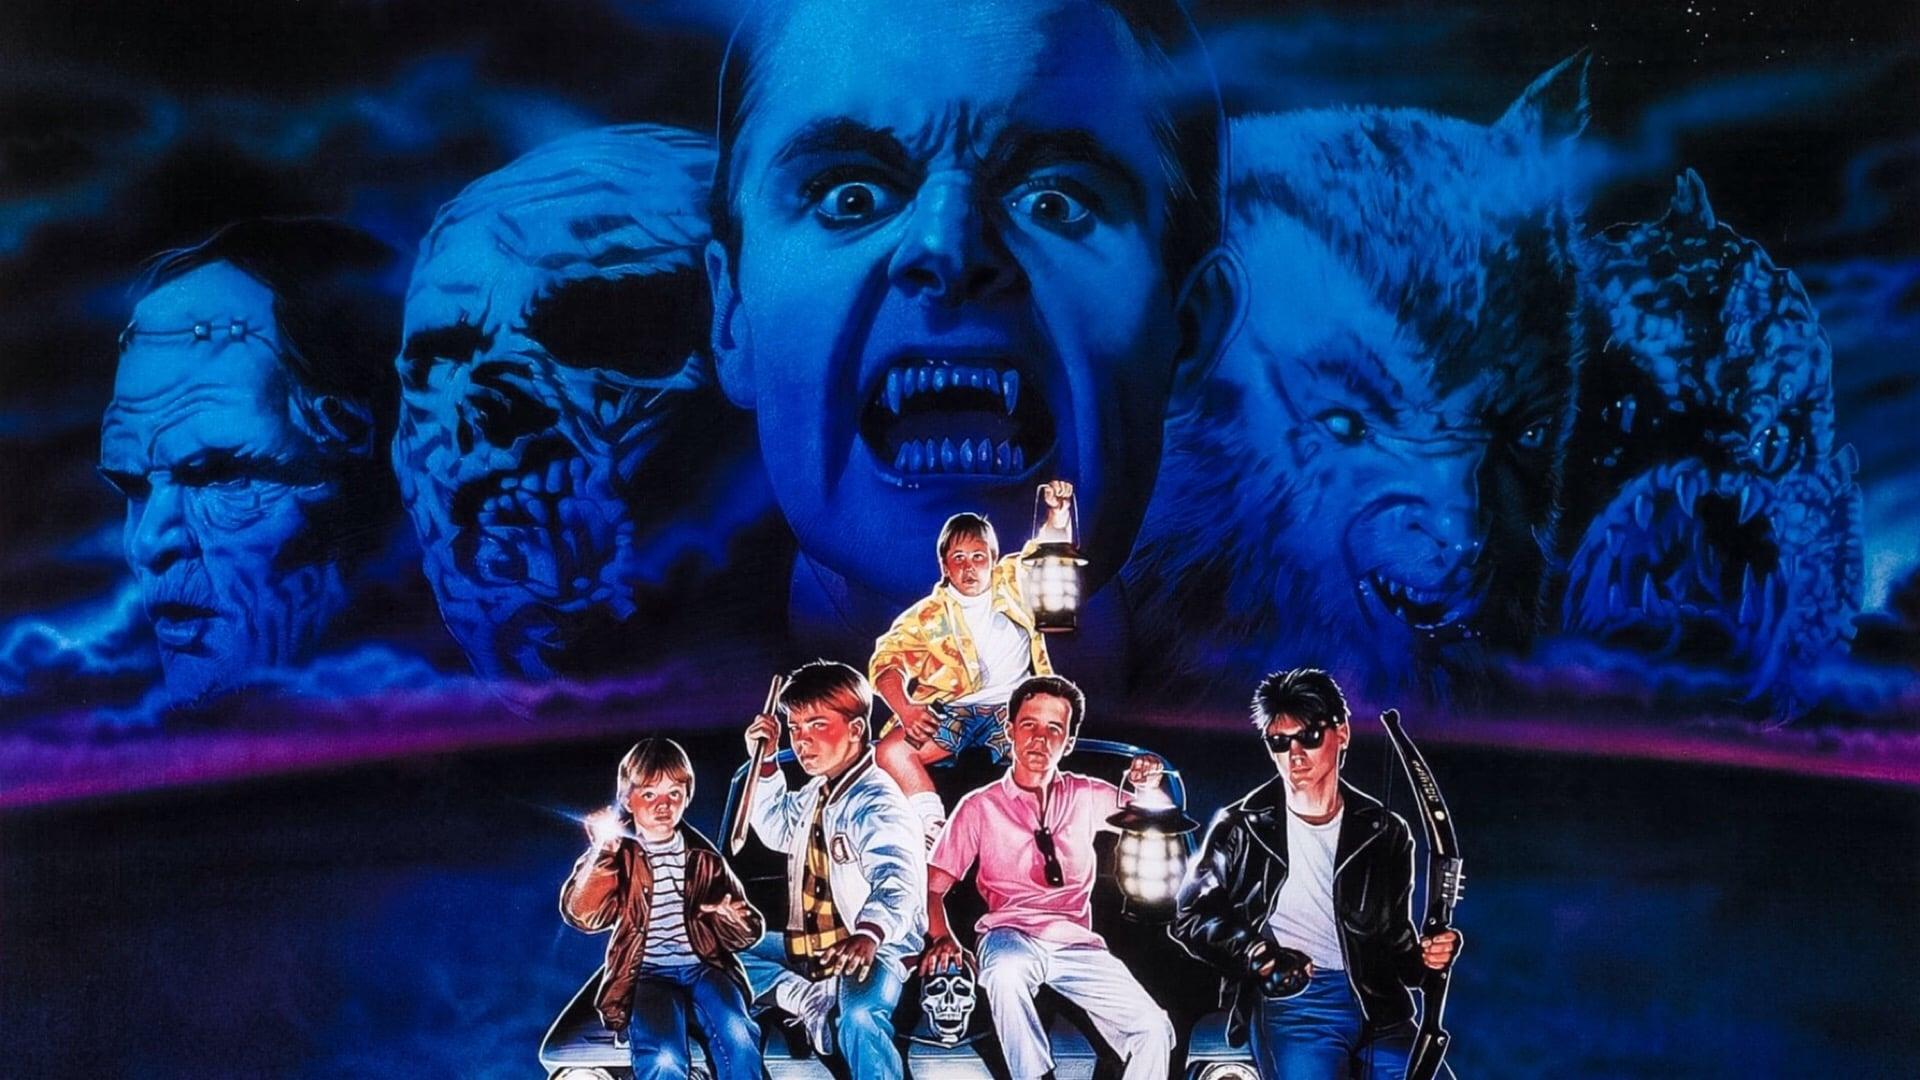 The Monster Squad backdrop